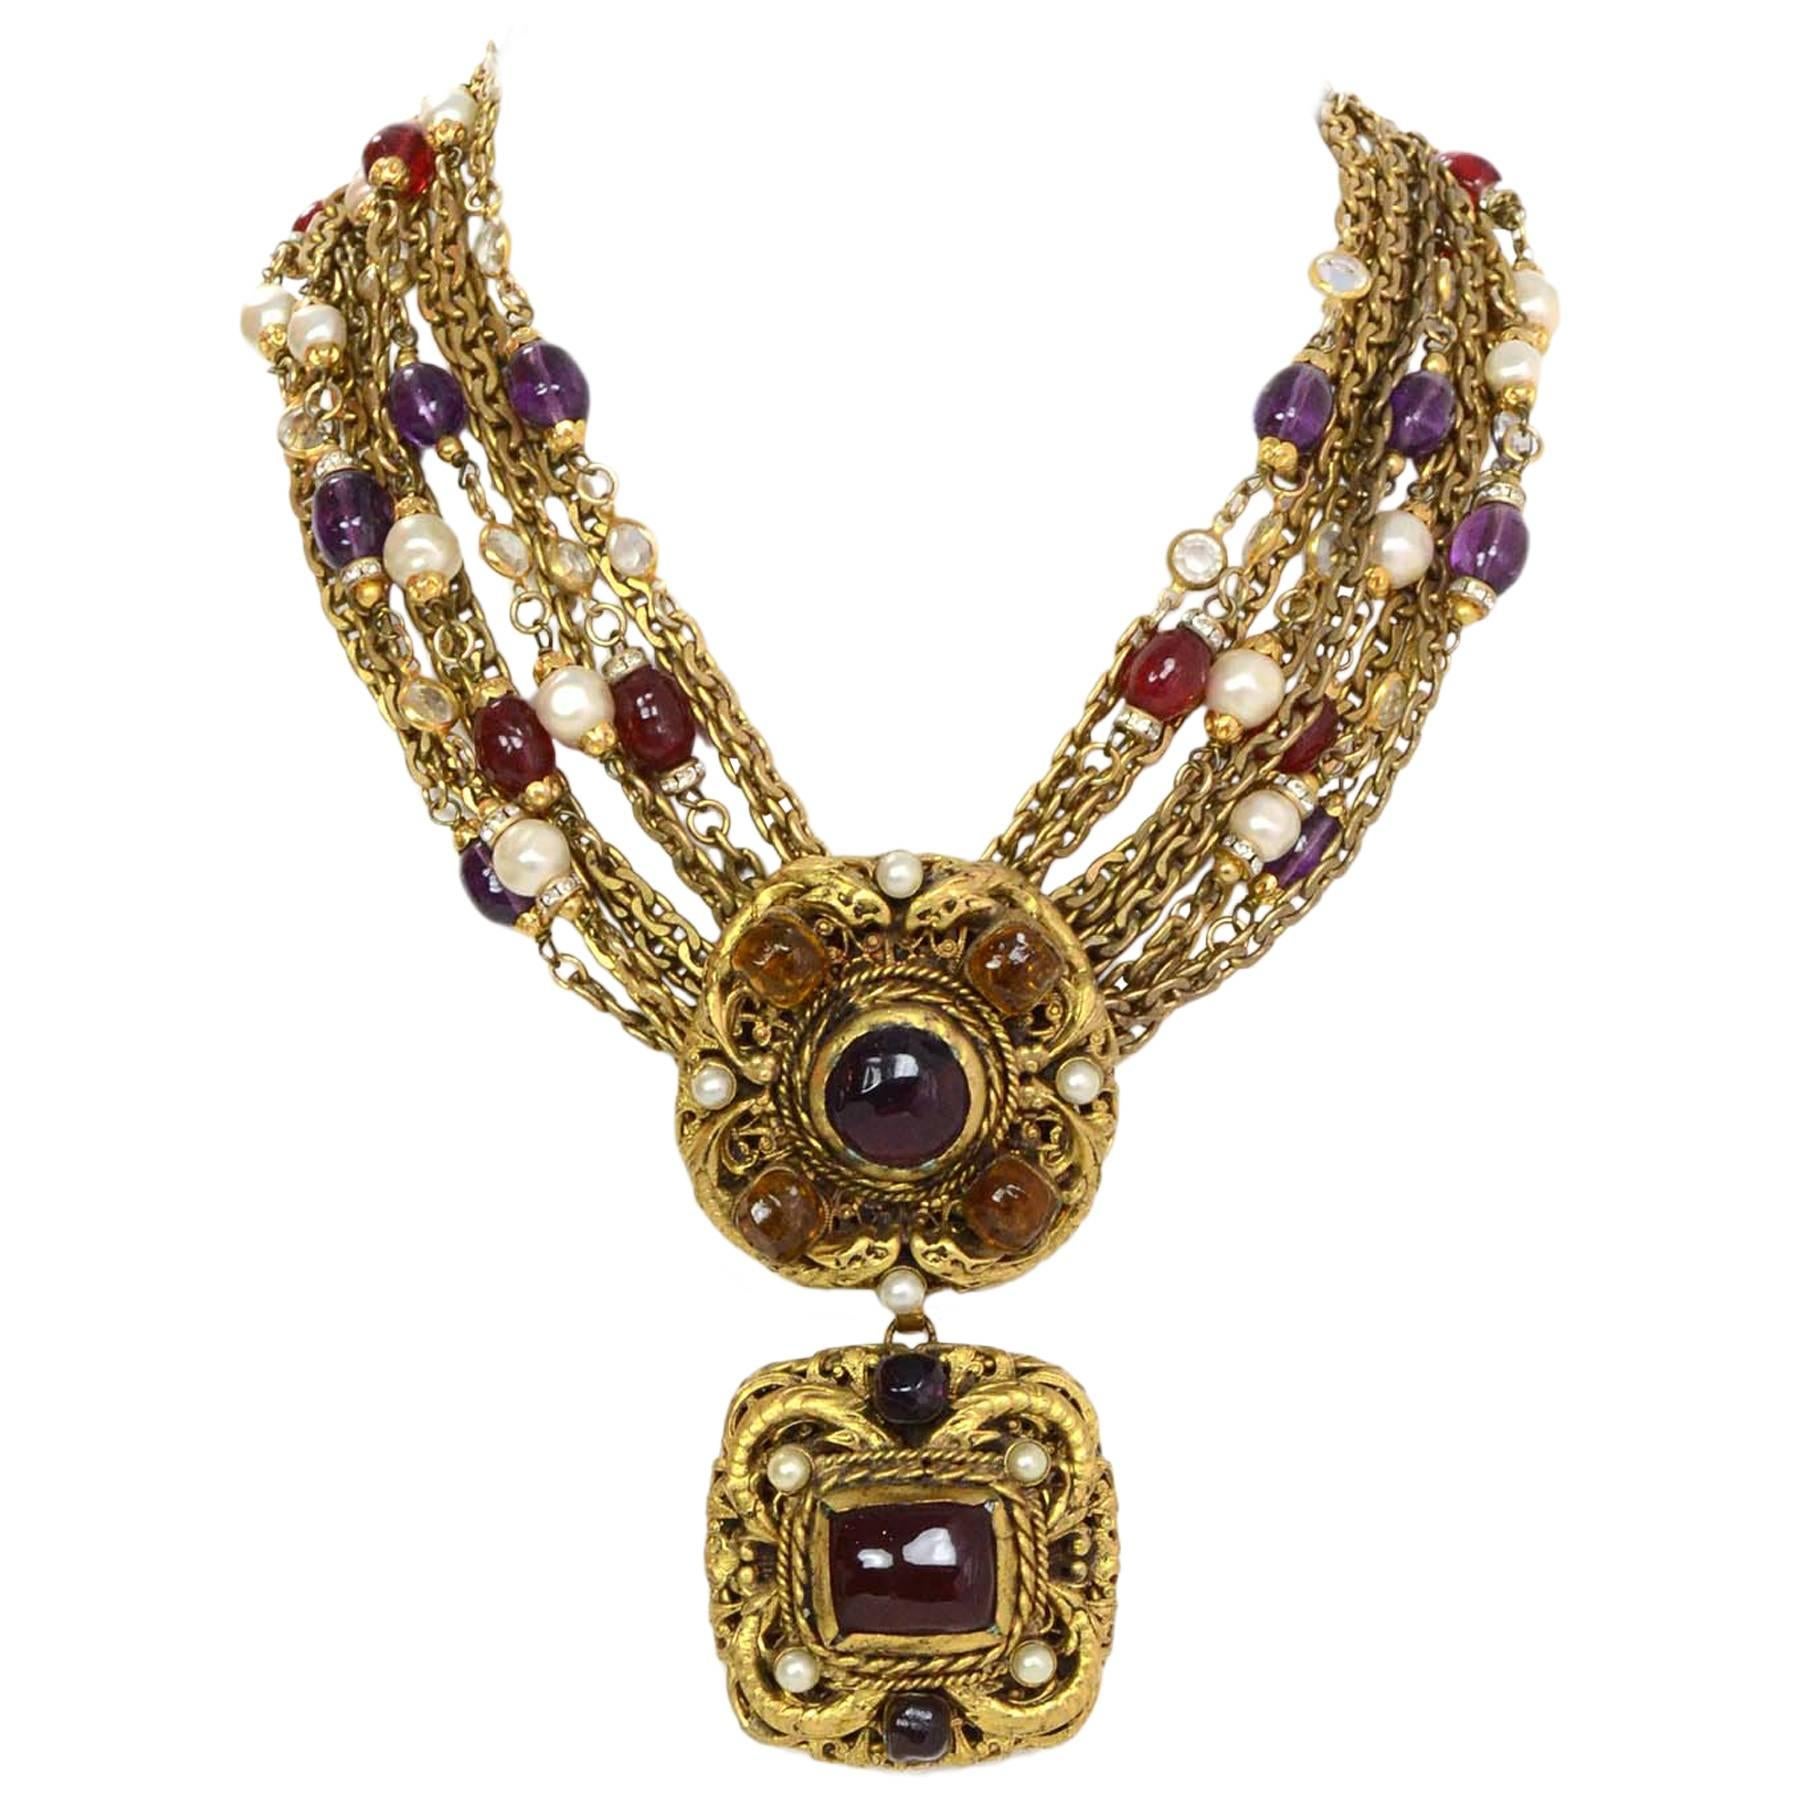 Chanel Vintage '84 Multi-Strand Gripoix & Pearl Medallion Necklace 
Features three detachable medallions gripoix and pearls

Made In: France
Year of Production: 1984
Color: Goldtone, red, purple, orange and ivory
Materials: Metal, poured class, faux